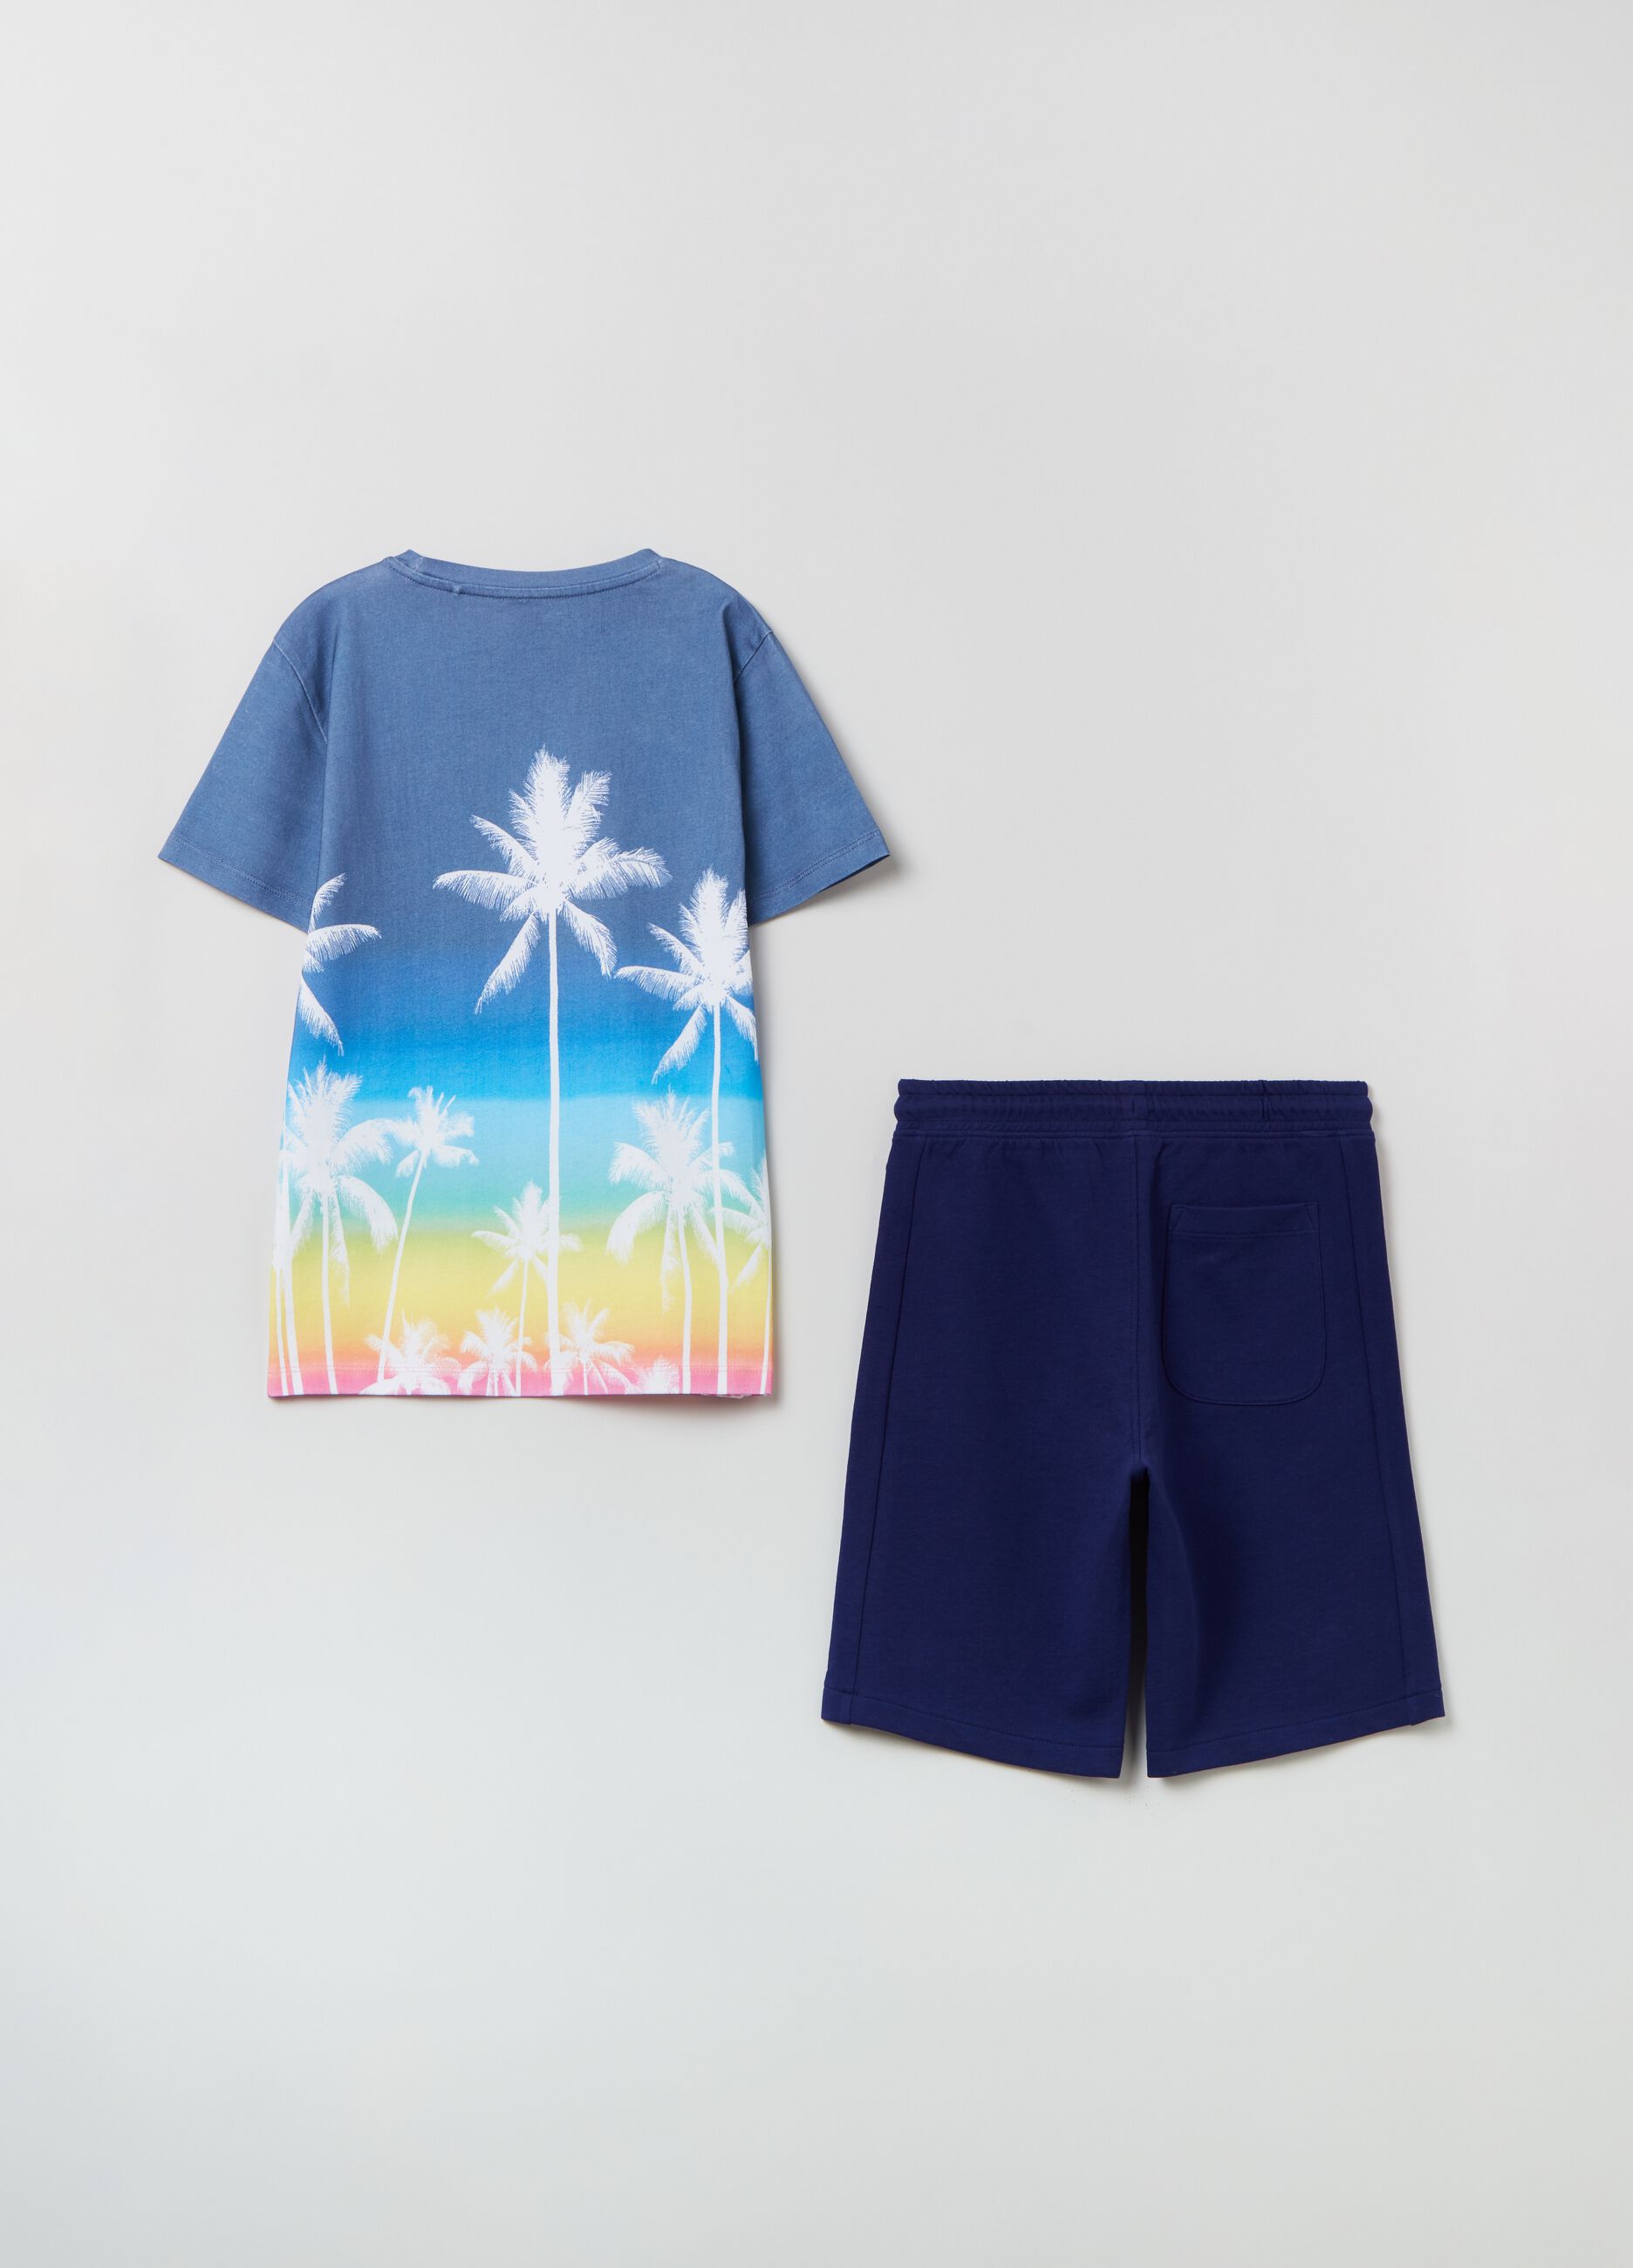 Cotton jogging set by Maui and Sons